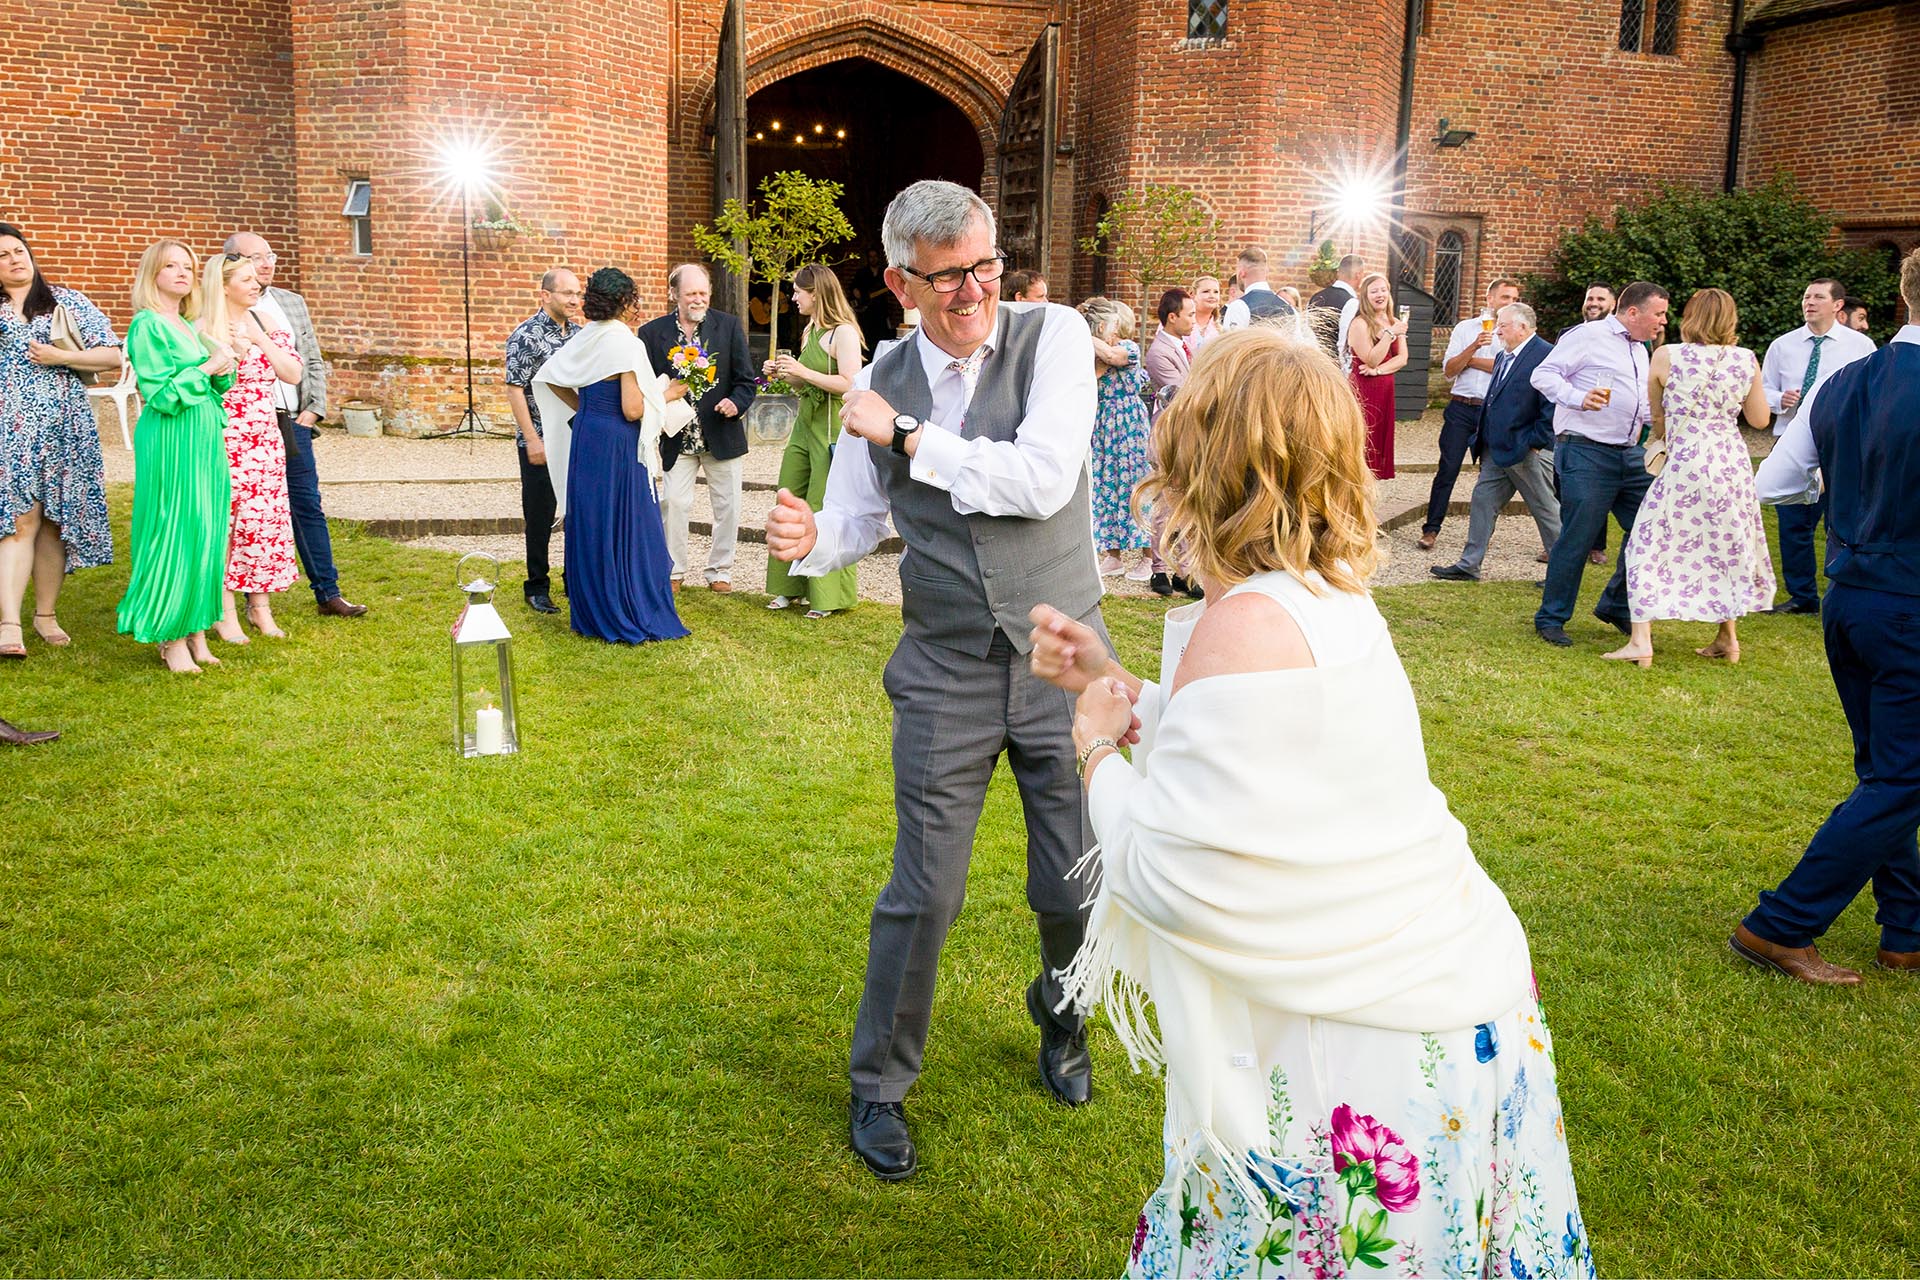 Wedding guests dancing at a Leez Priory wedding, Great Leighs, Chelmsford, Essex